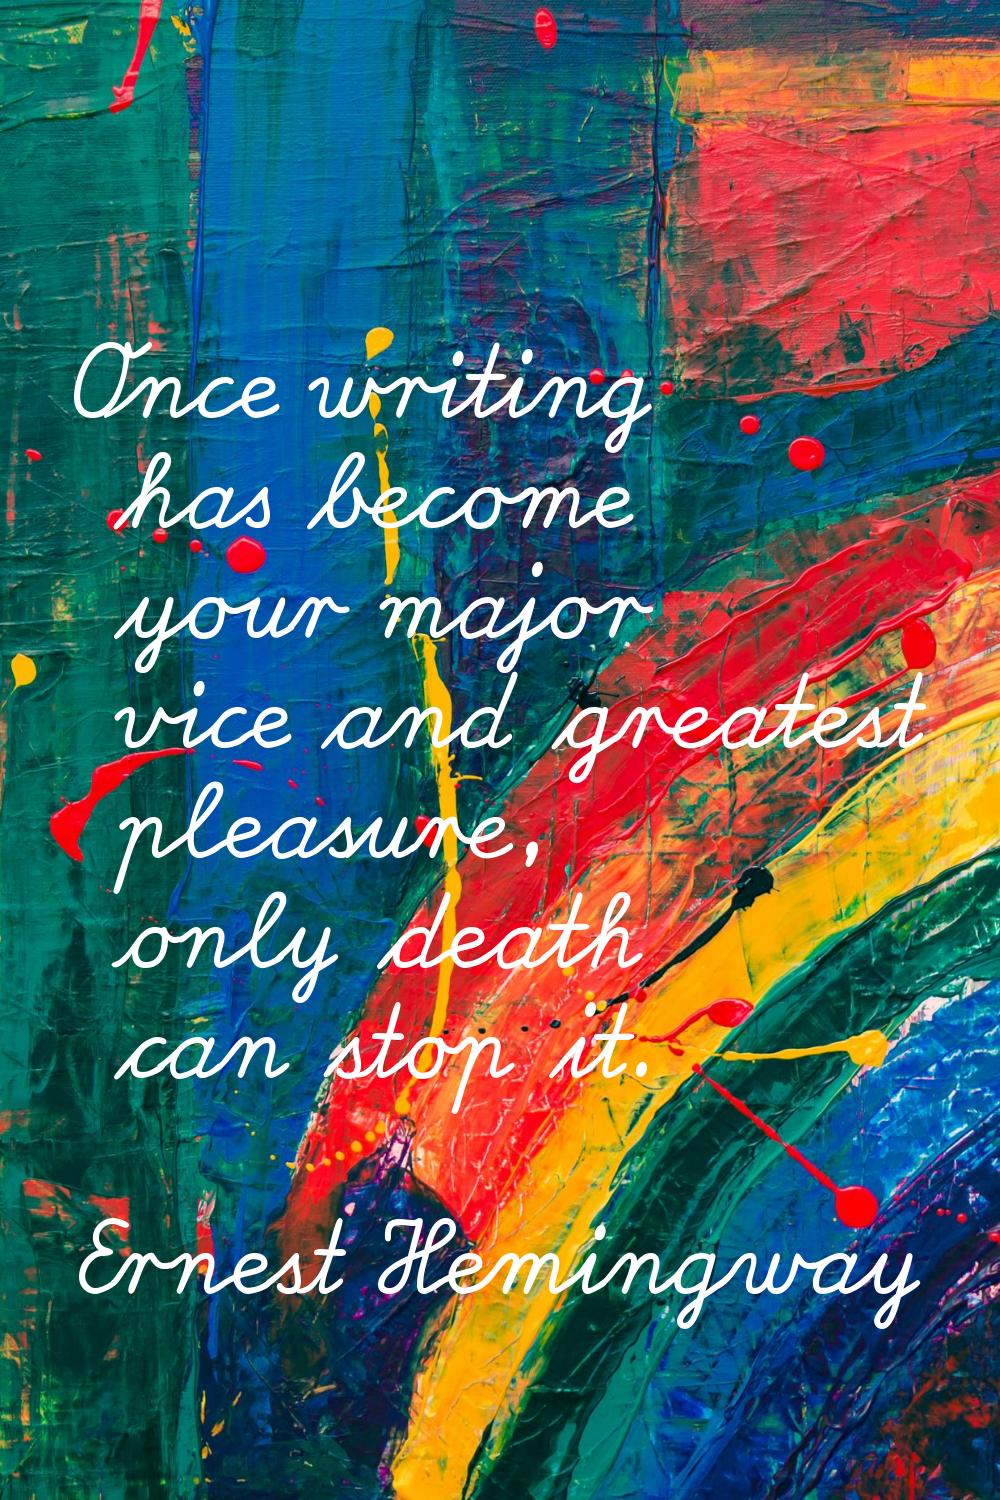 Once writing has become your major vice and greatest pleasure, only death can stop it.